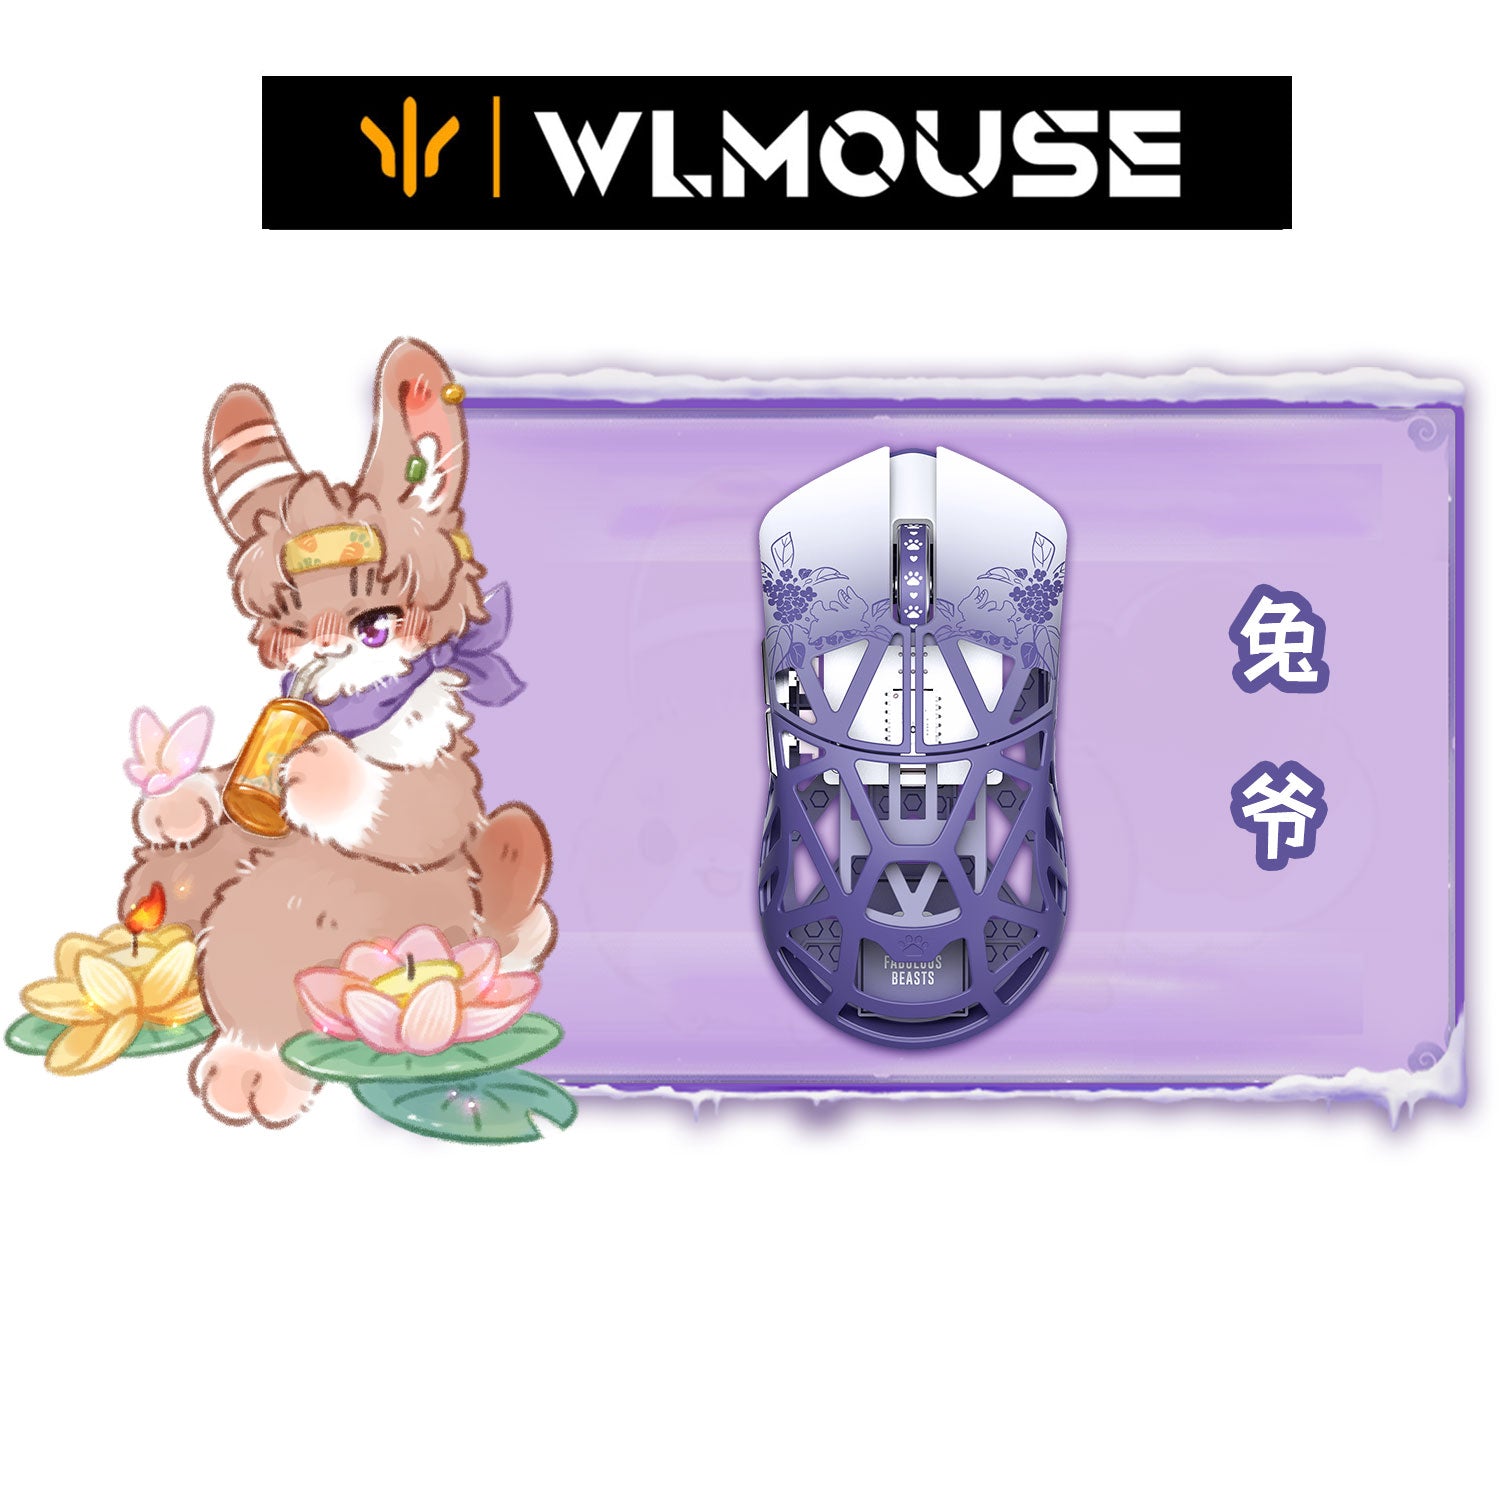 WLMOUSE BEAST X Wireless Gaming Mouse Fabulous Beasts Series (Rabbit)